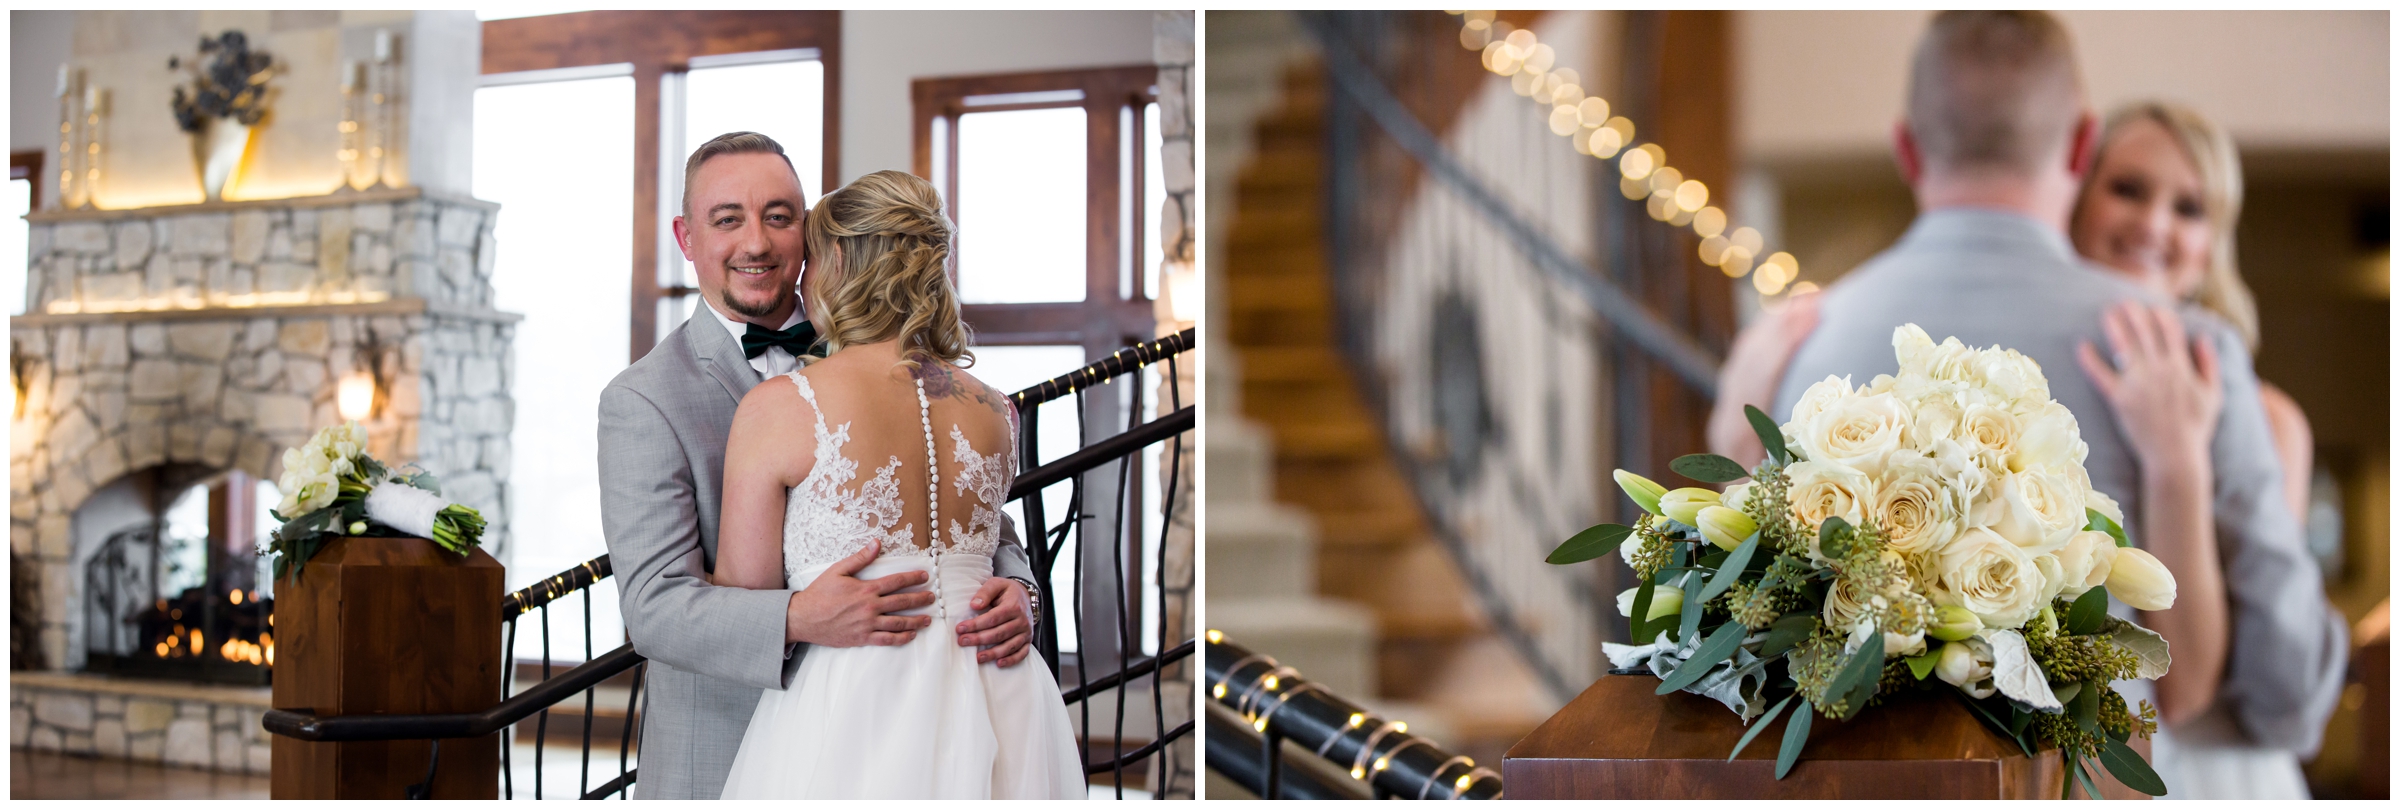 bride and groom on staircase at Castle Pines Colorado wedding 